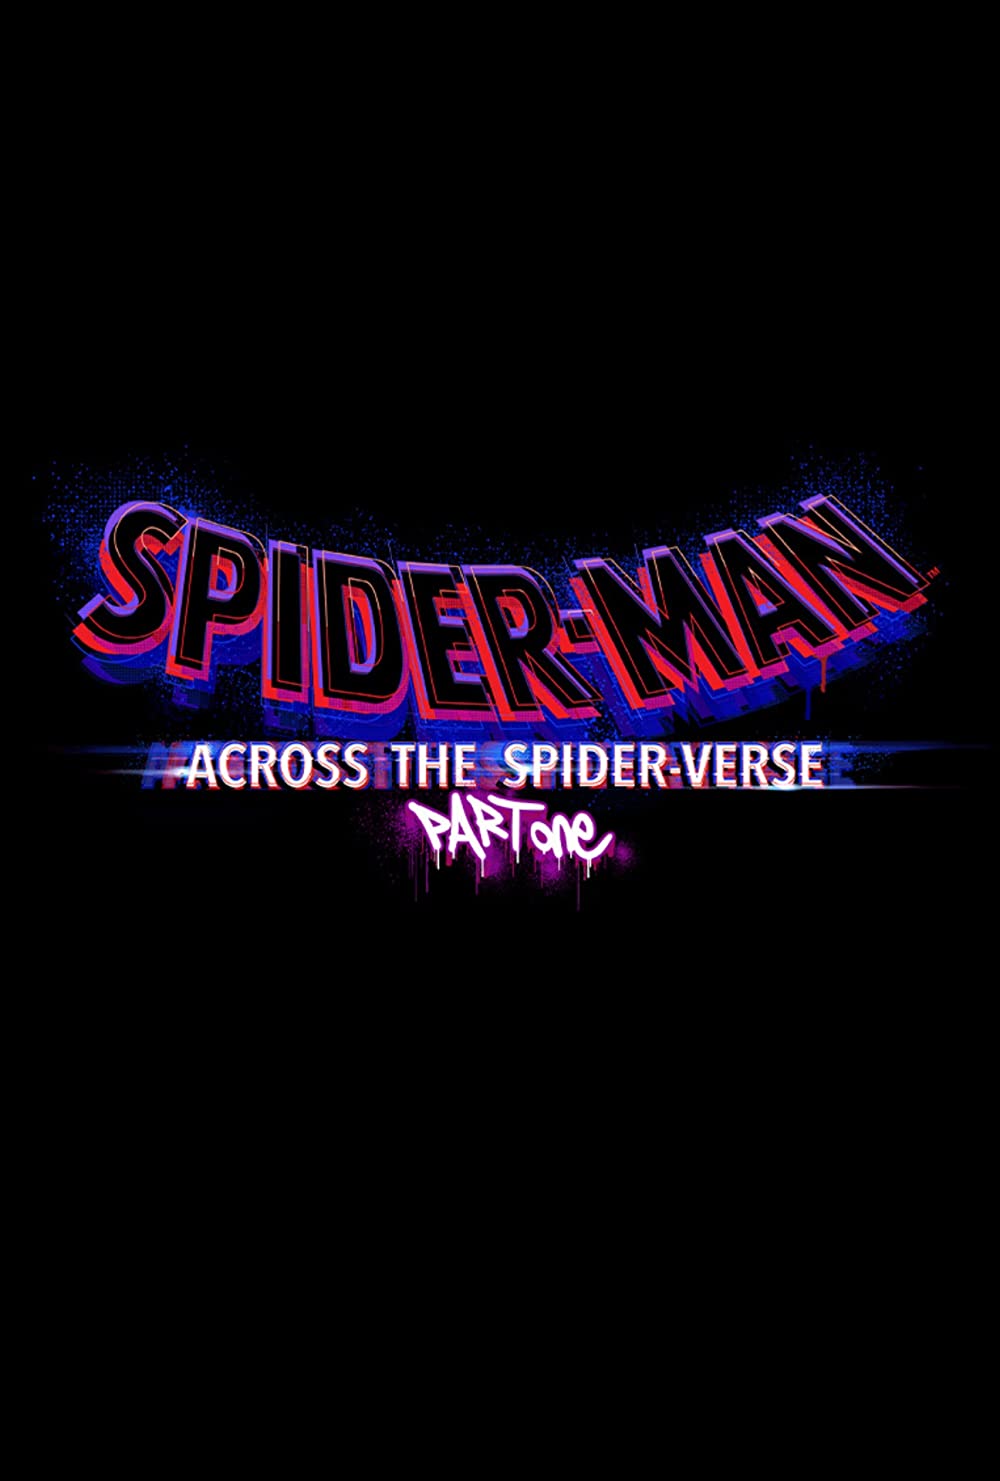 Spider-Man: Across the Spider-Verse New Poster Released! - HIGH ON CINEMA